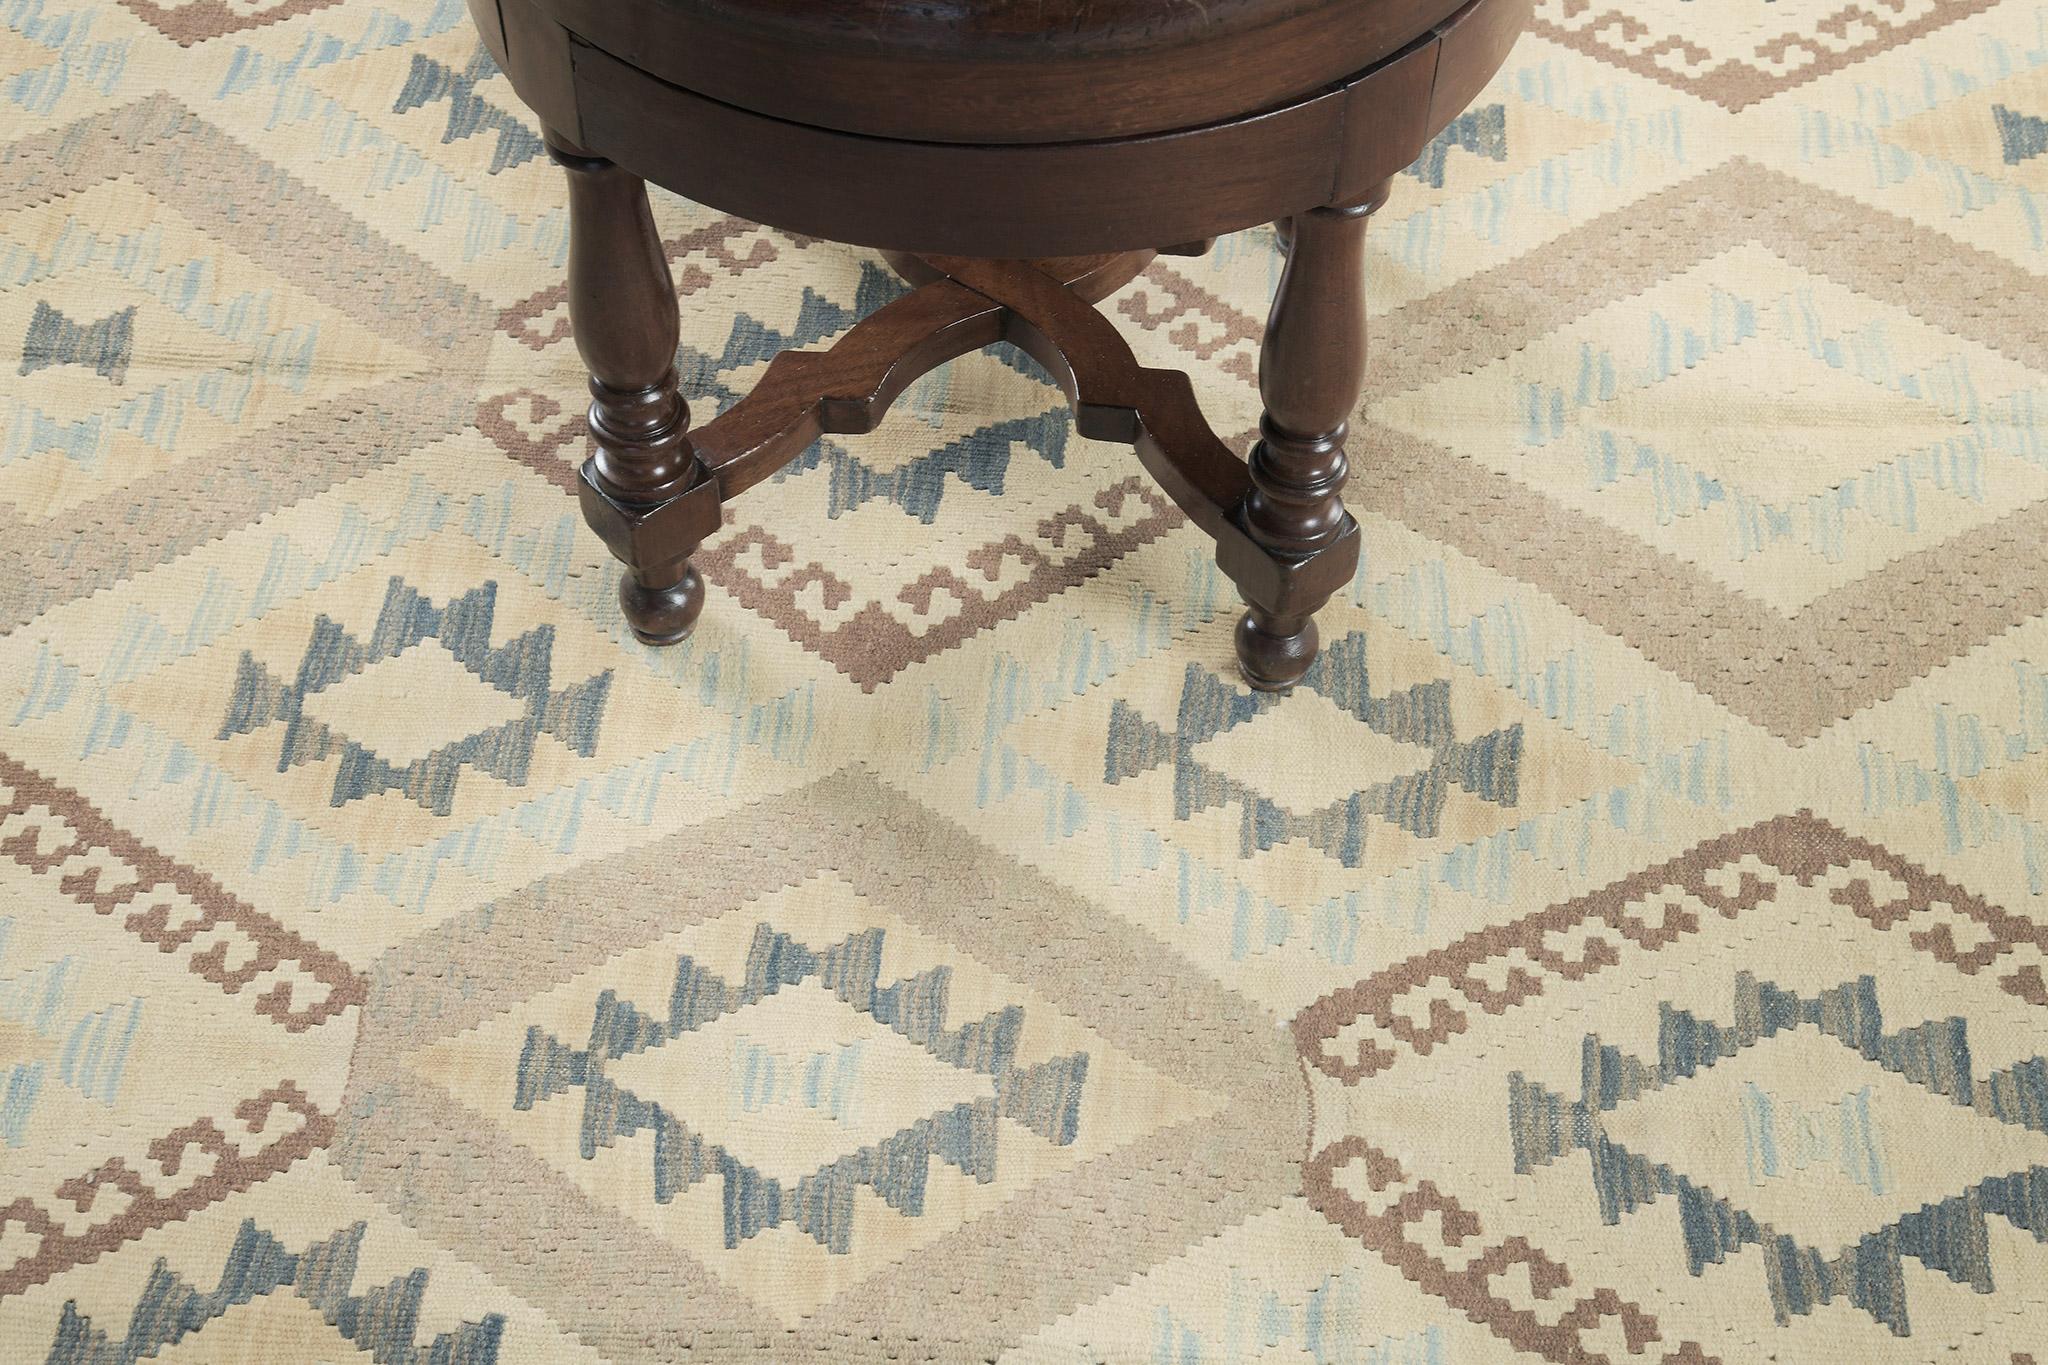 This remarkable vintage-style Tribal flatweave allows you to intensify your creativity and visions. It features the geometrical tribal design in muted cool tones that is pleasing to the eyes of your guests. A must-have collection that can be passed